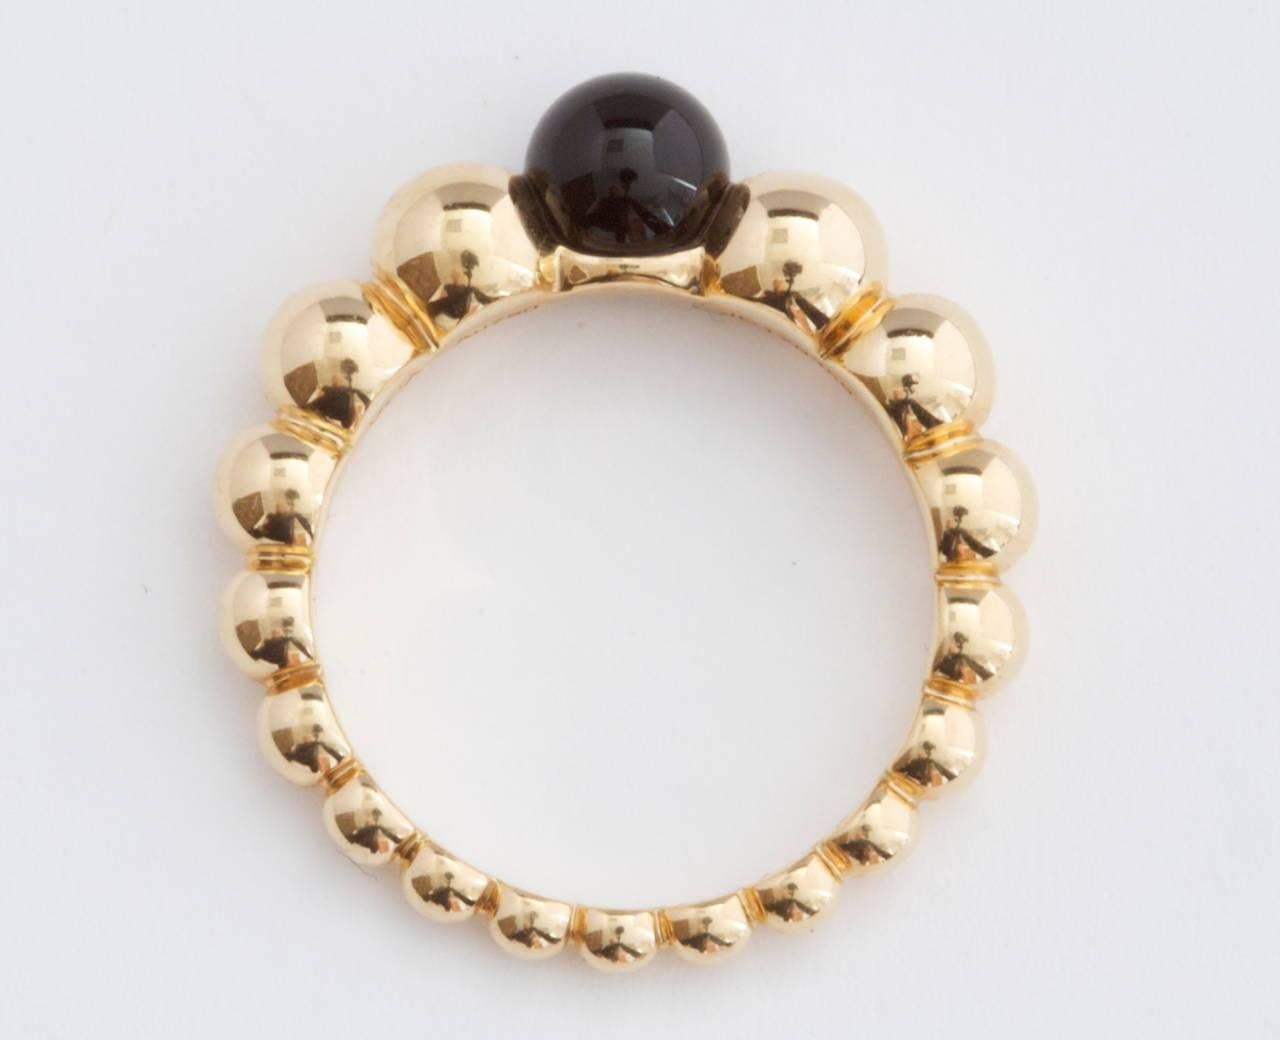 Van Cleef & Arpels, a long rich history of trend setting fashion that is still relevant today. Fashioned with a jet black bead of onyx that is nicely complemented by descending beads of 18k yellow gold. Signed VCA and numbered.   

Size 51 or 5-3/4